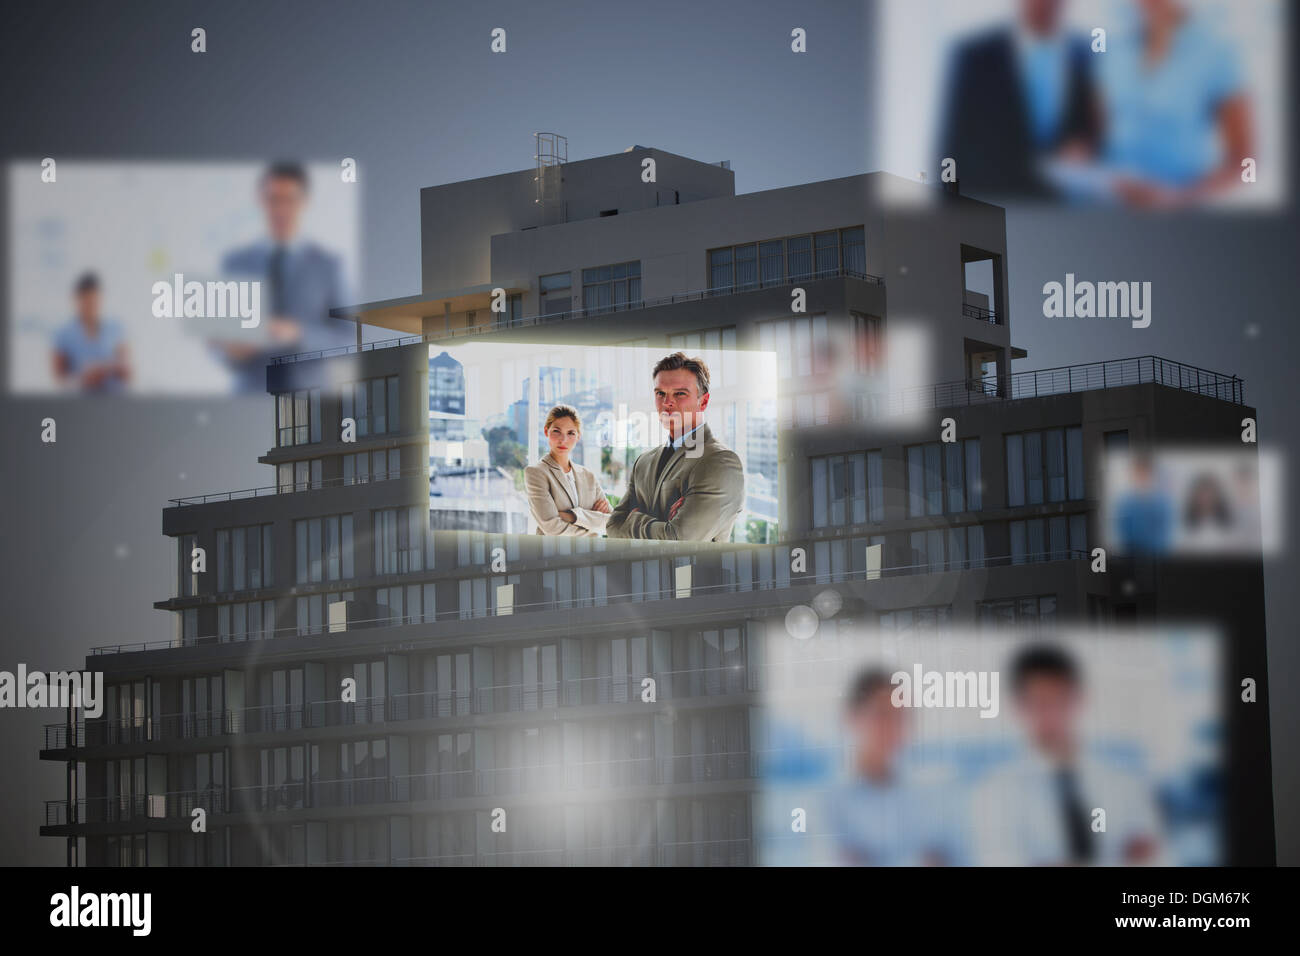 Futuristic interface showing business people Stock Photo